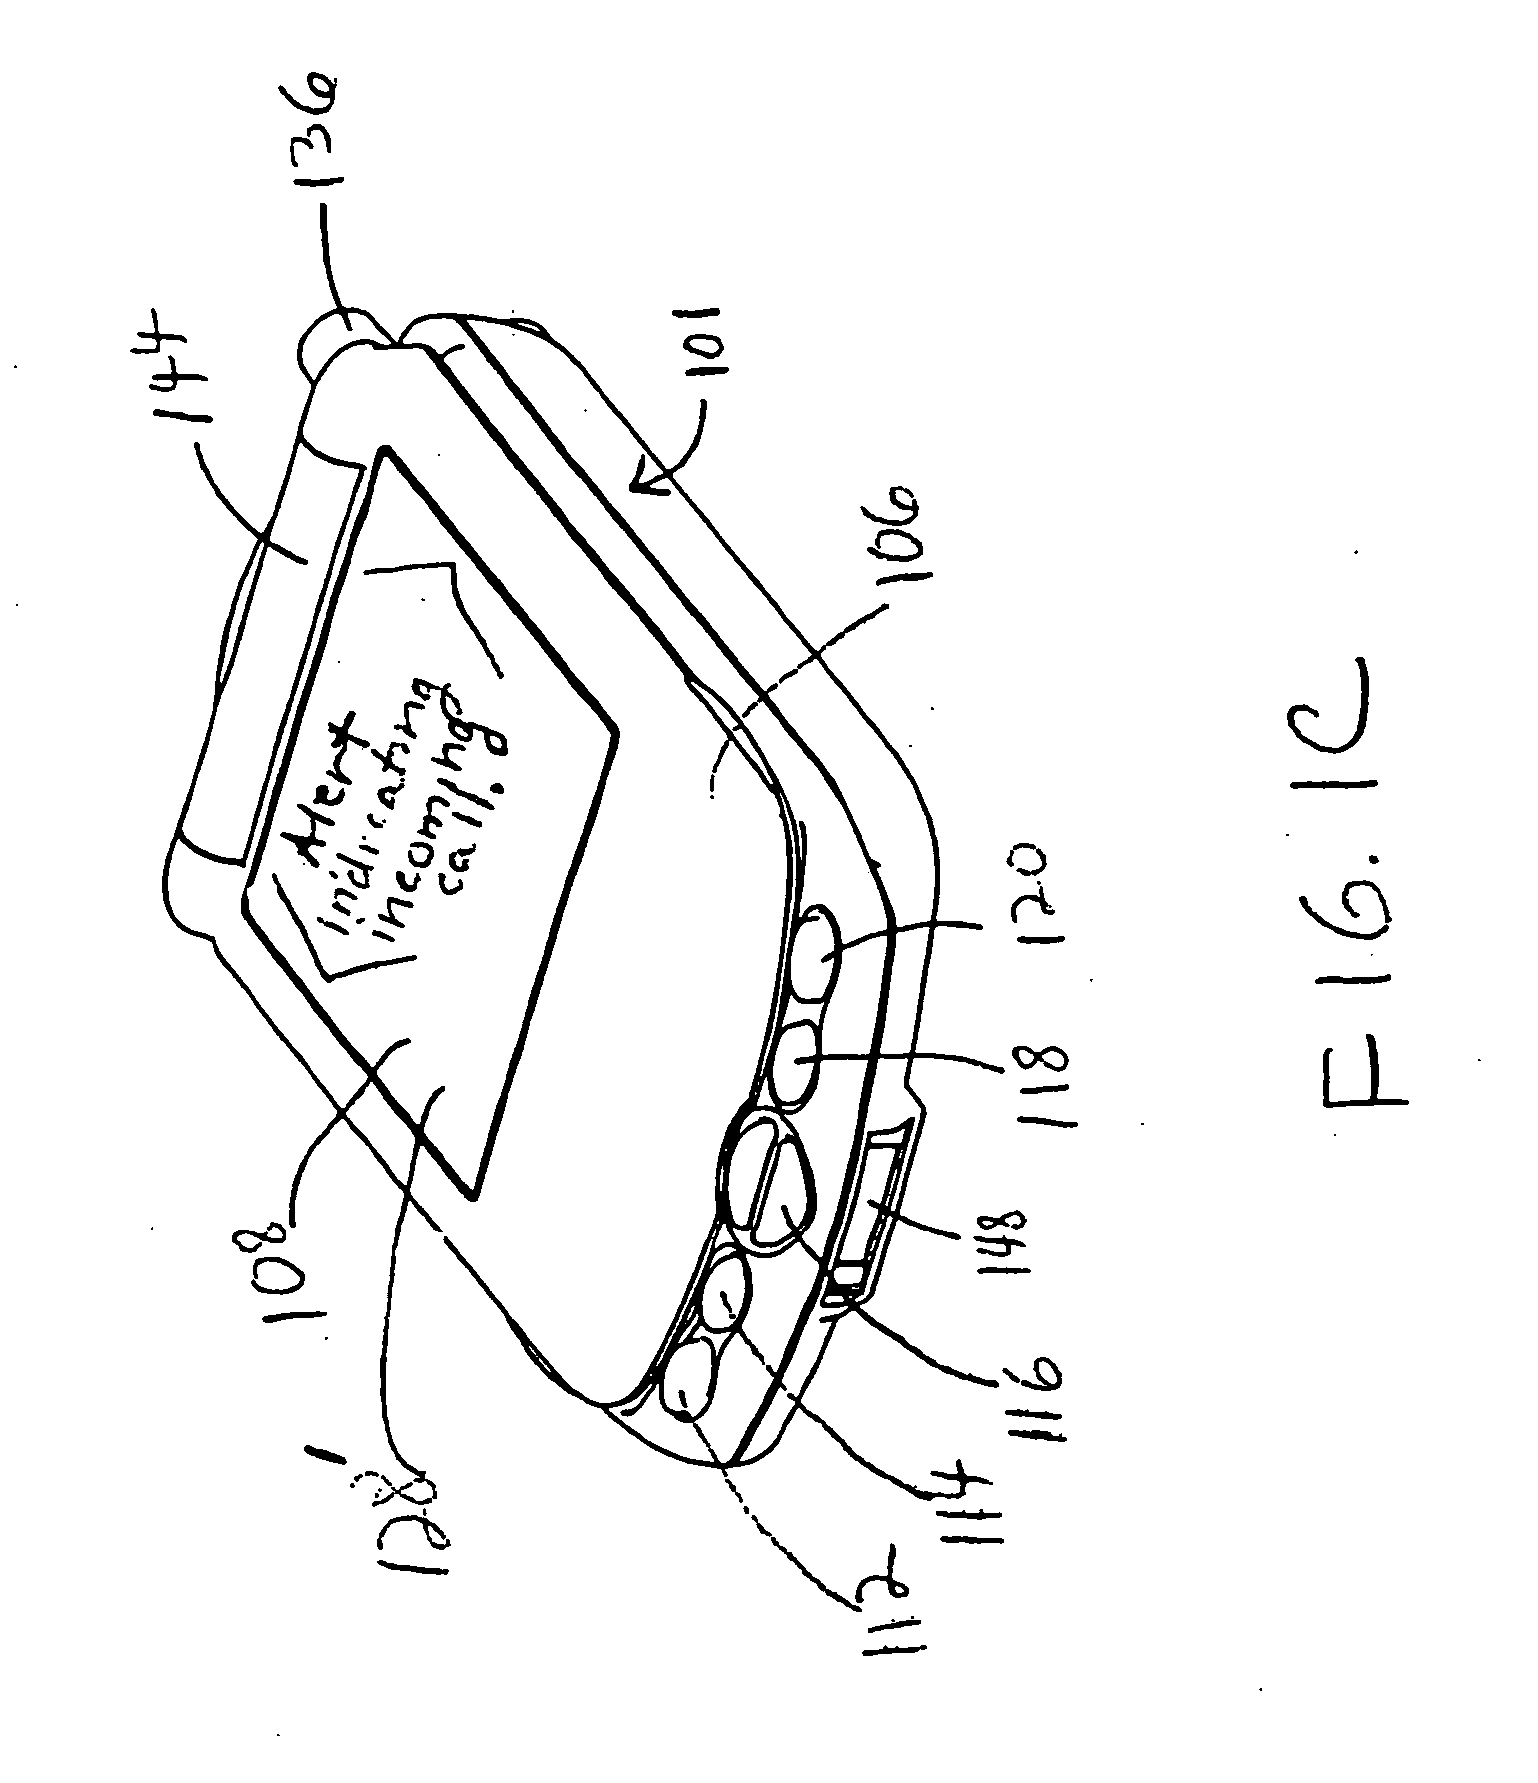 Interface for processing of an alternate symbol in a computer device